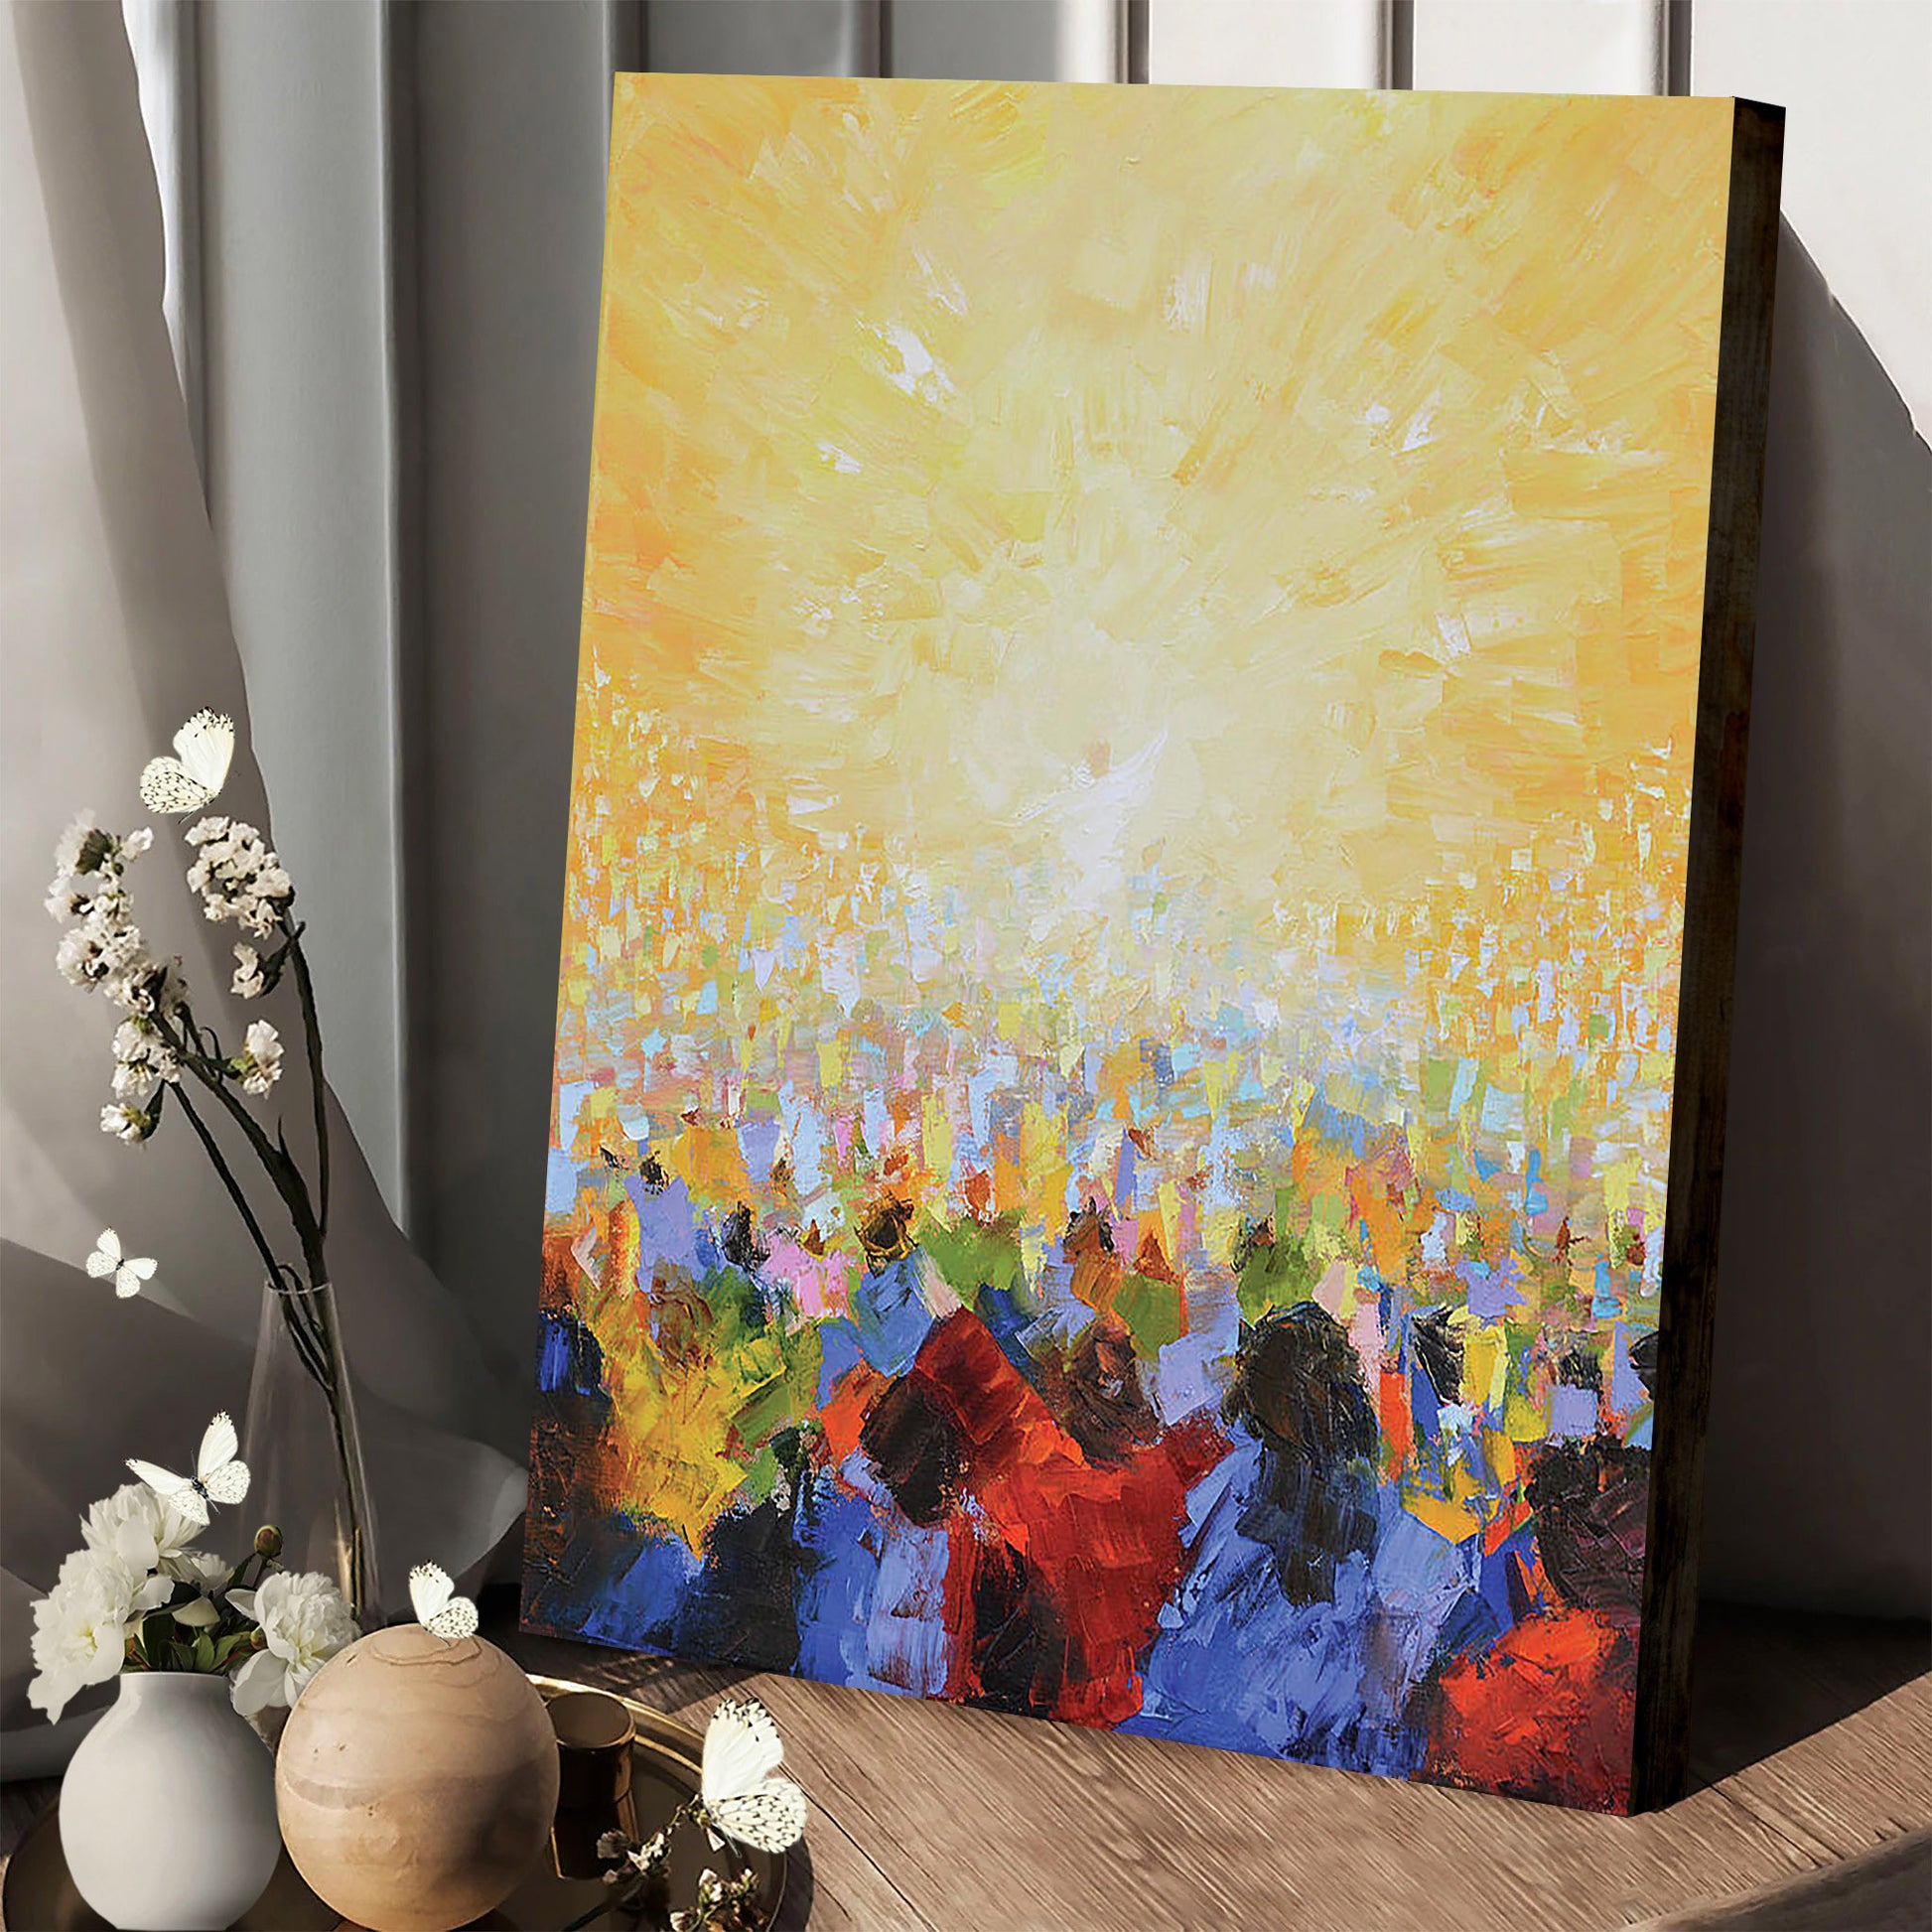 Hallelujah Easter Canvas Wall Art - Easter Canvas Pictures - Christian Canvas Wall Decor